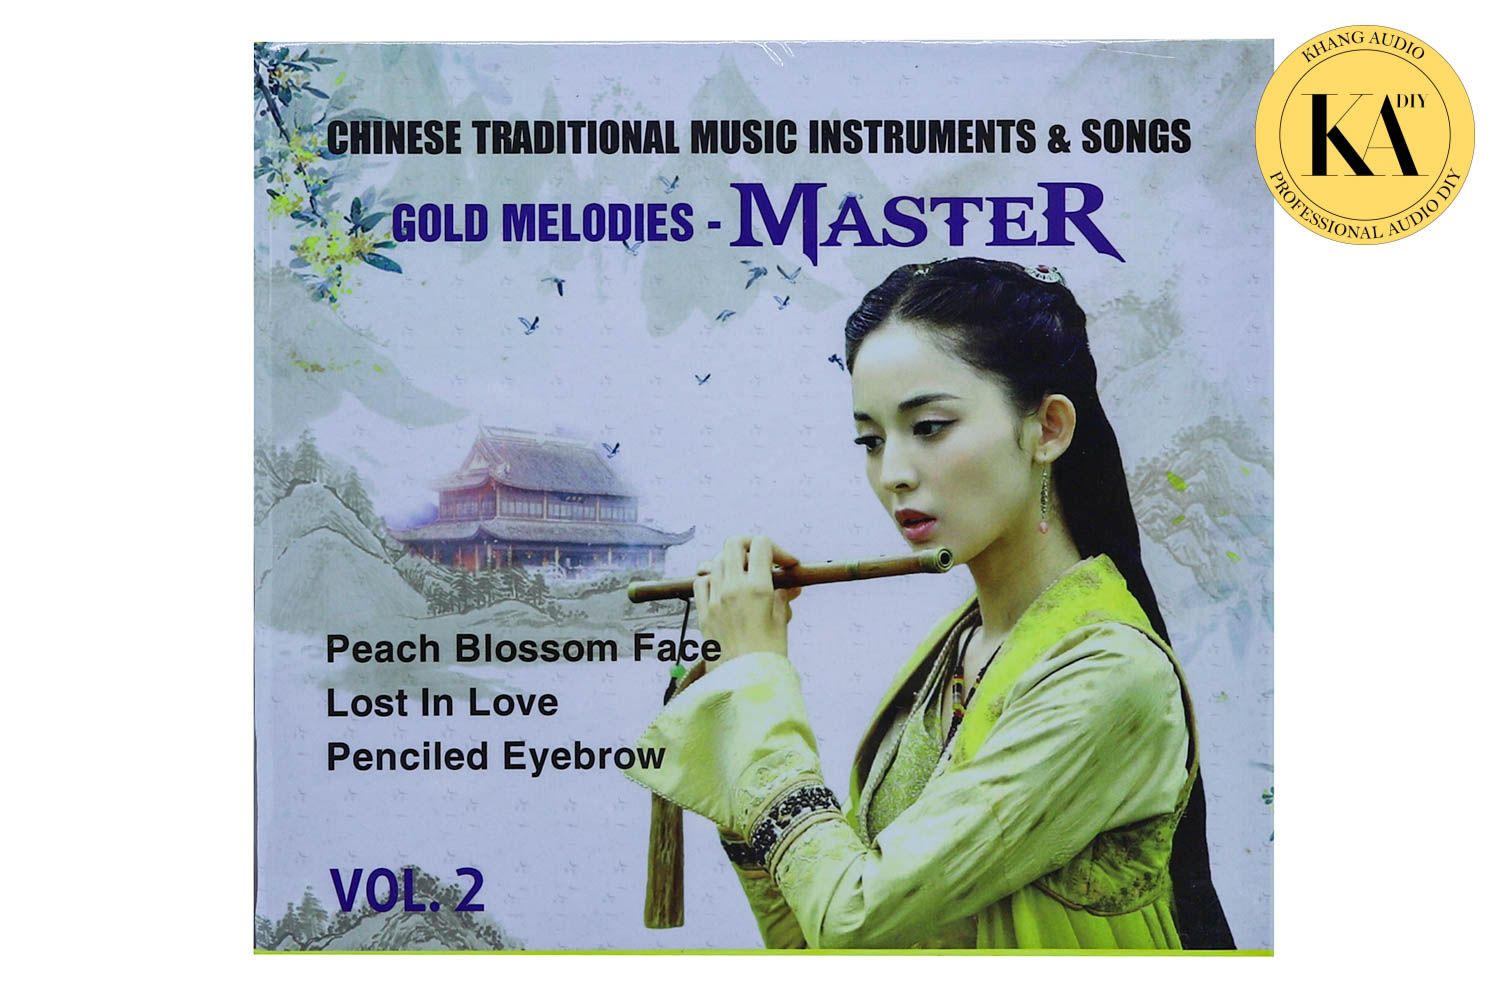 Gold Melodies - Master Vol.2